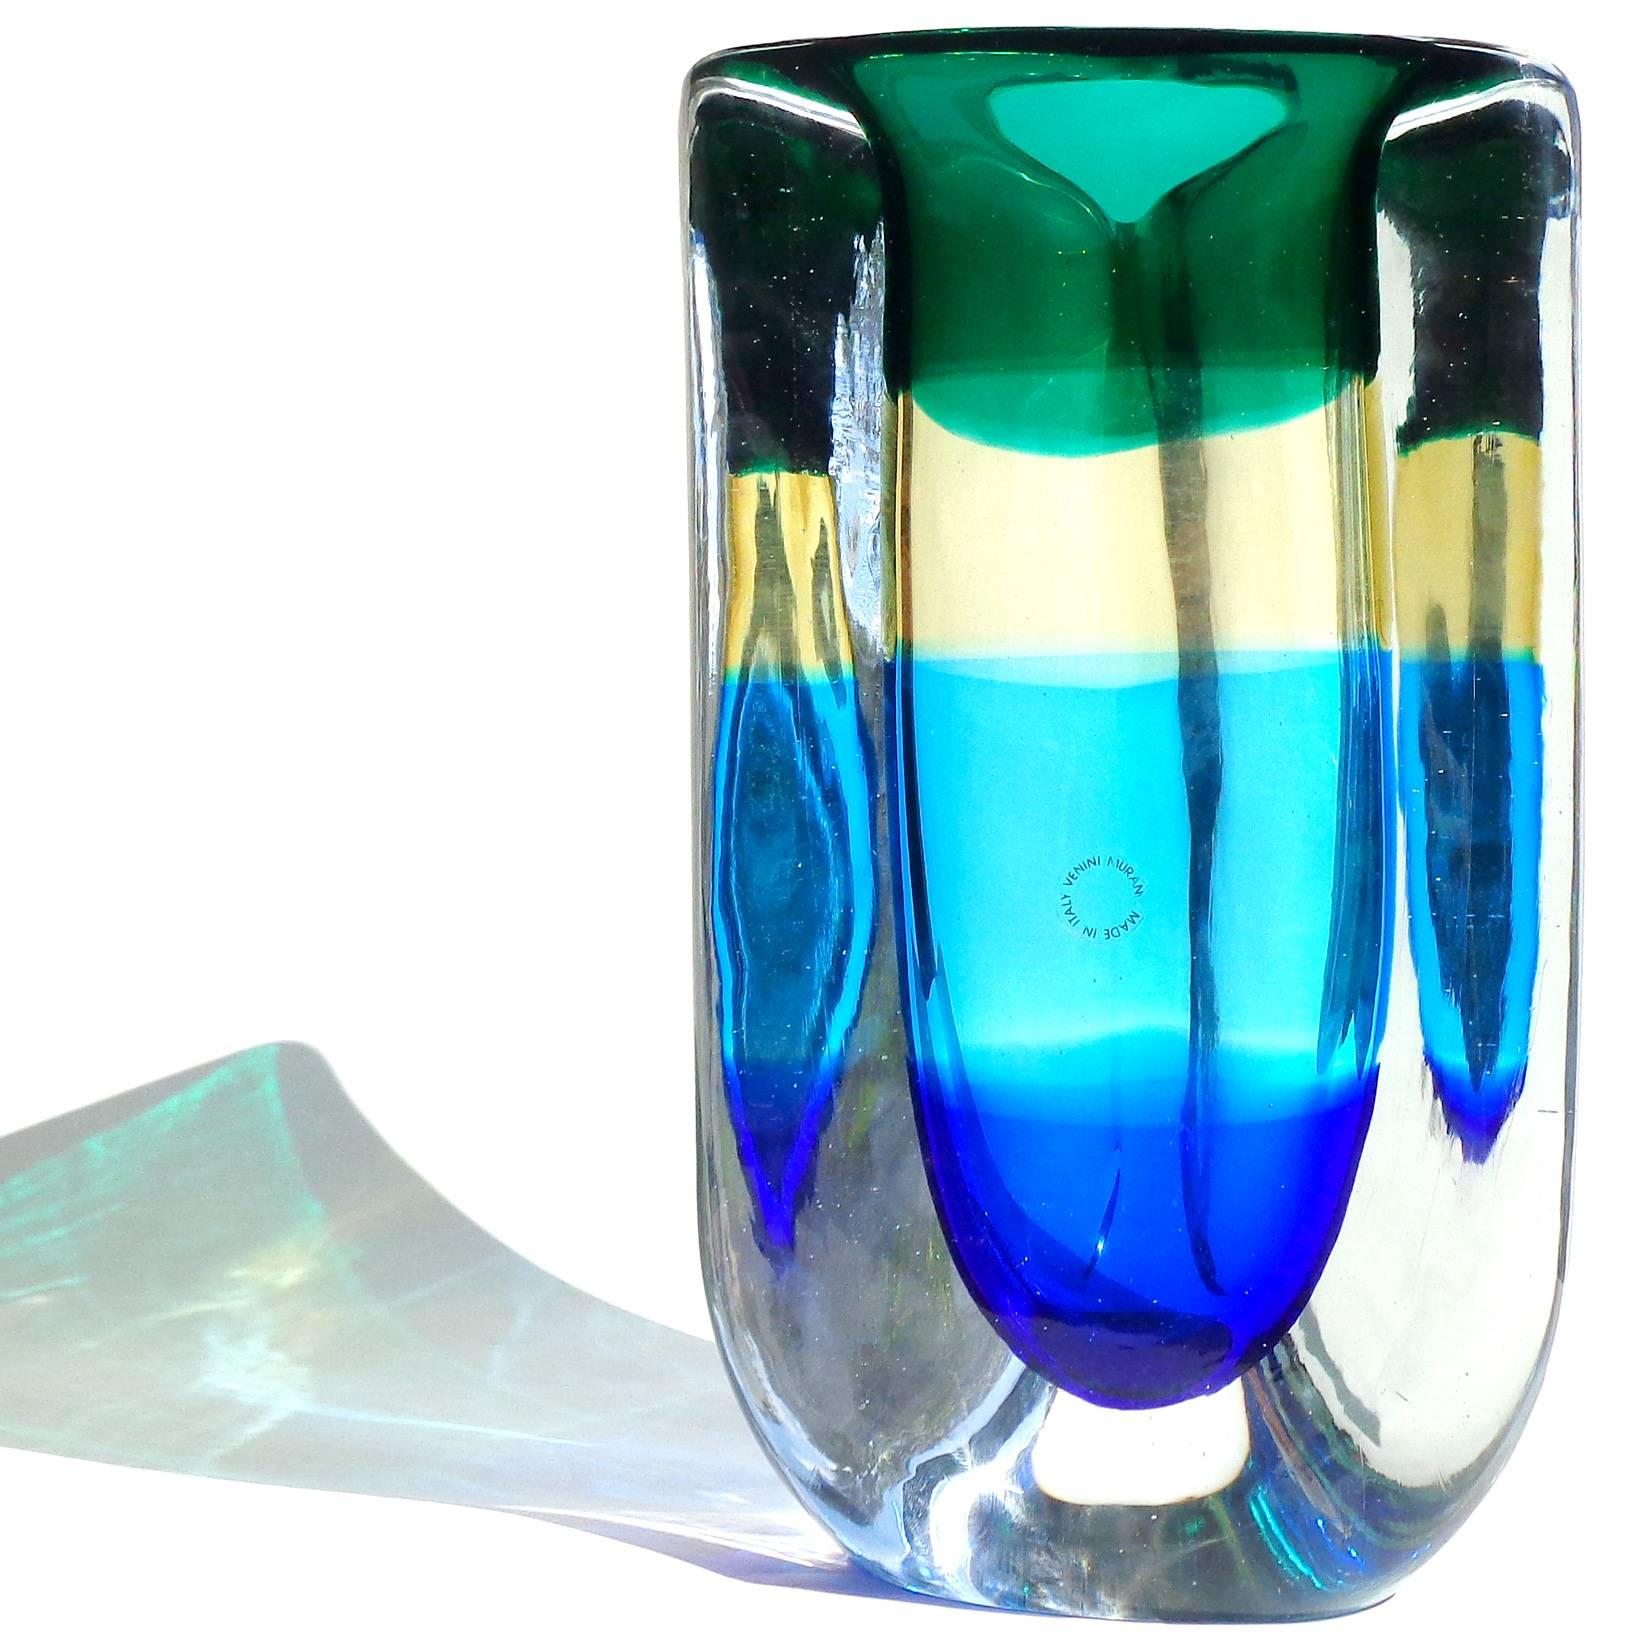 Amazing large Murano hand blown thick walled Sommerso green, yellow blue and cobalt Italian art glass flower vase. Documented to designer Fulvio Bianconi for Venini, circa 1992. Signed, dated and with a limited edition number. Also still retains